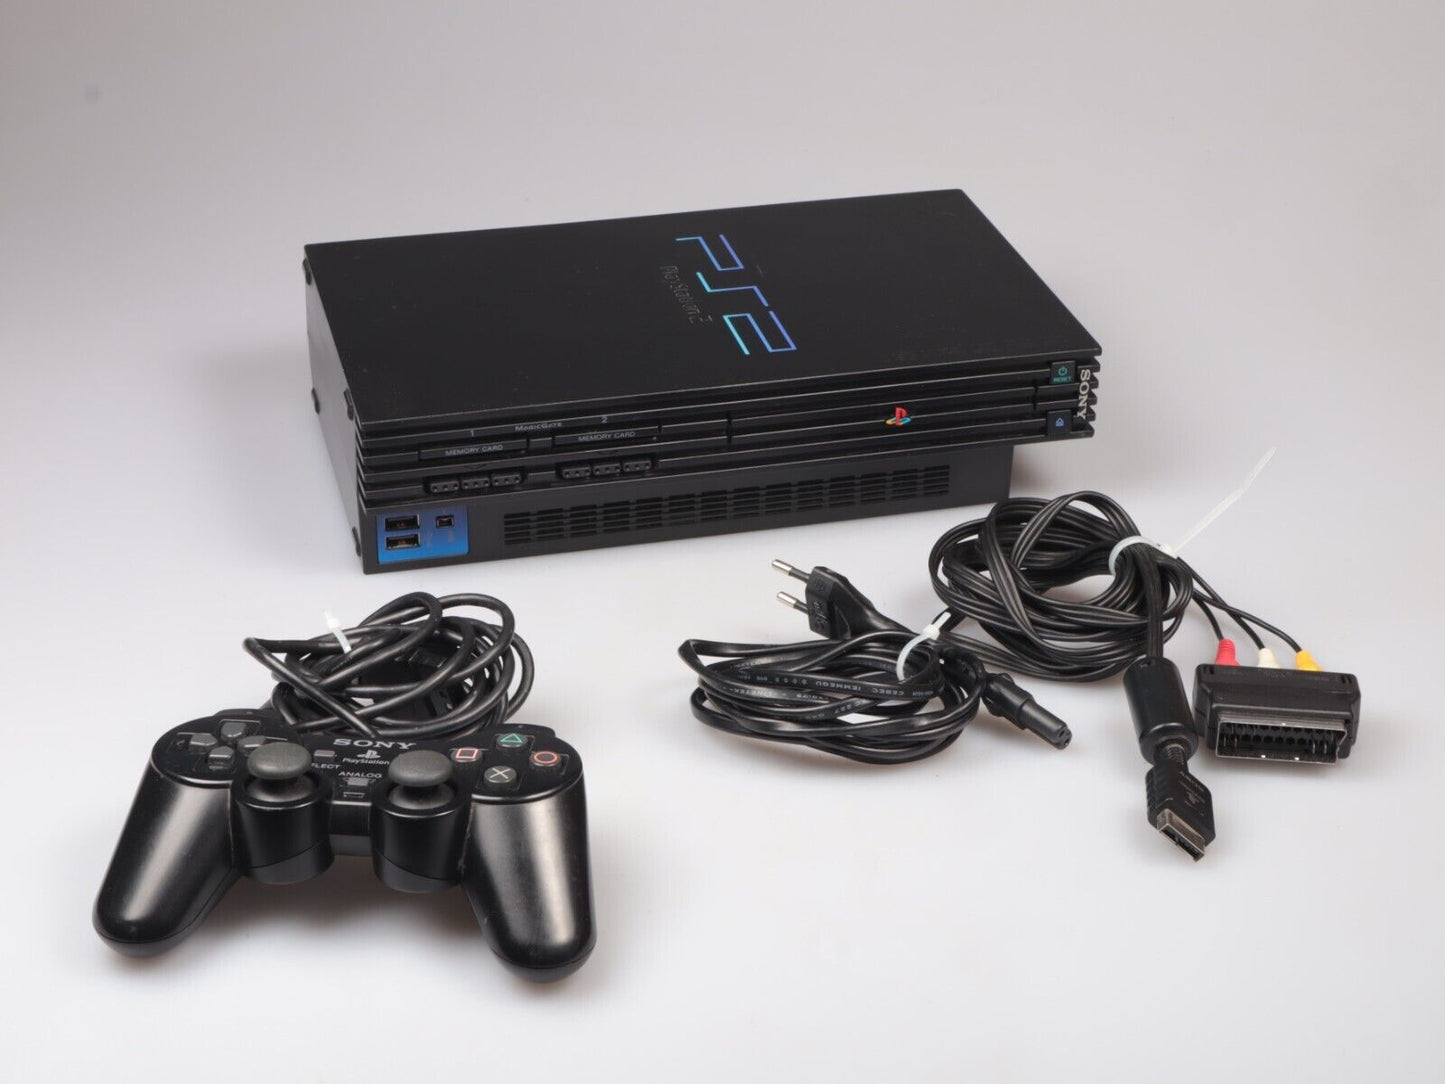 PlayStation 2 | Slim SCPH-70004 | Controller & Cables | Black